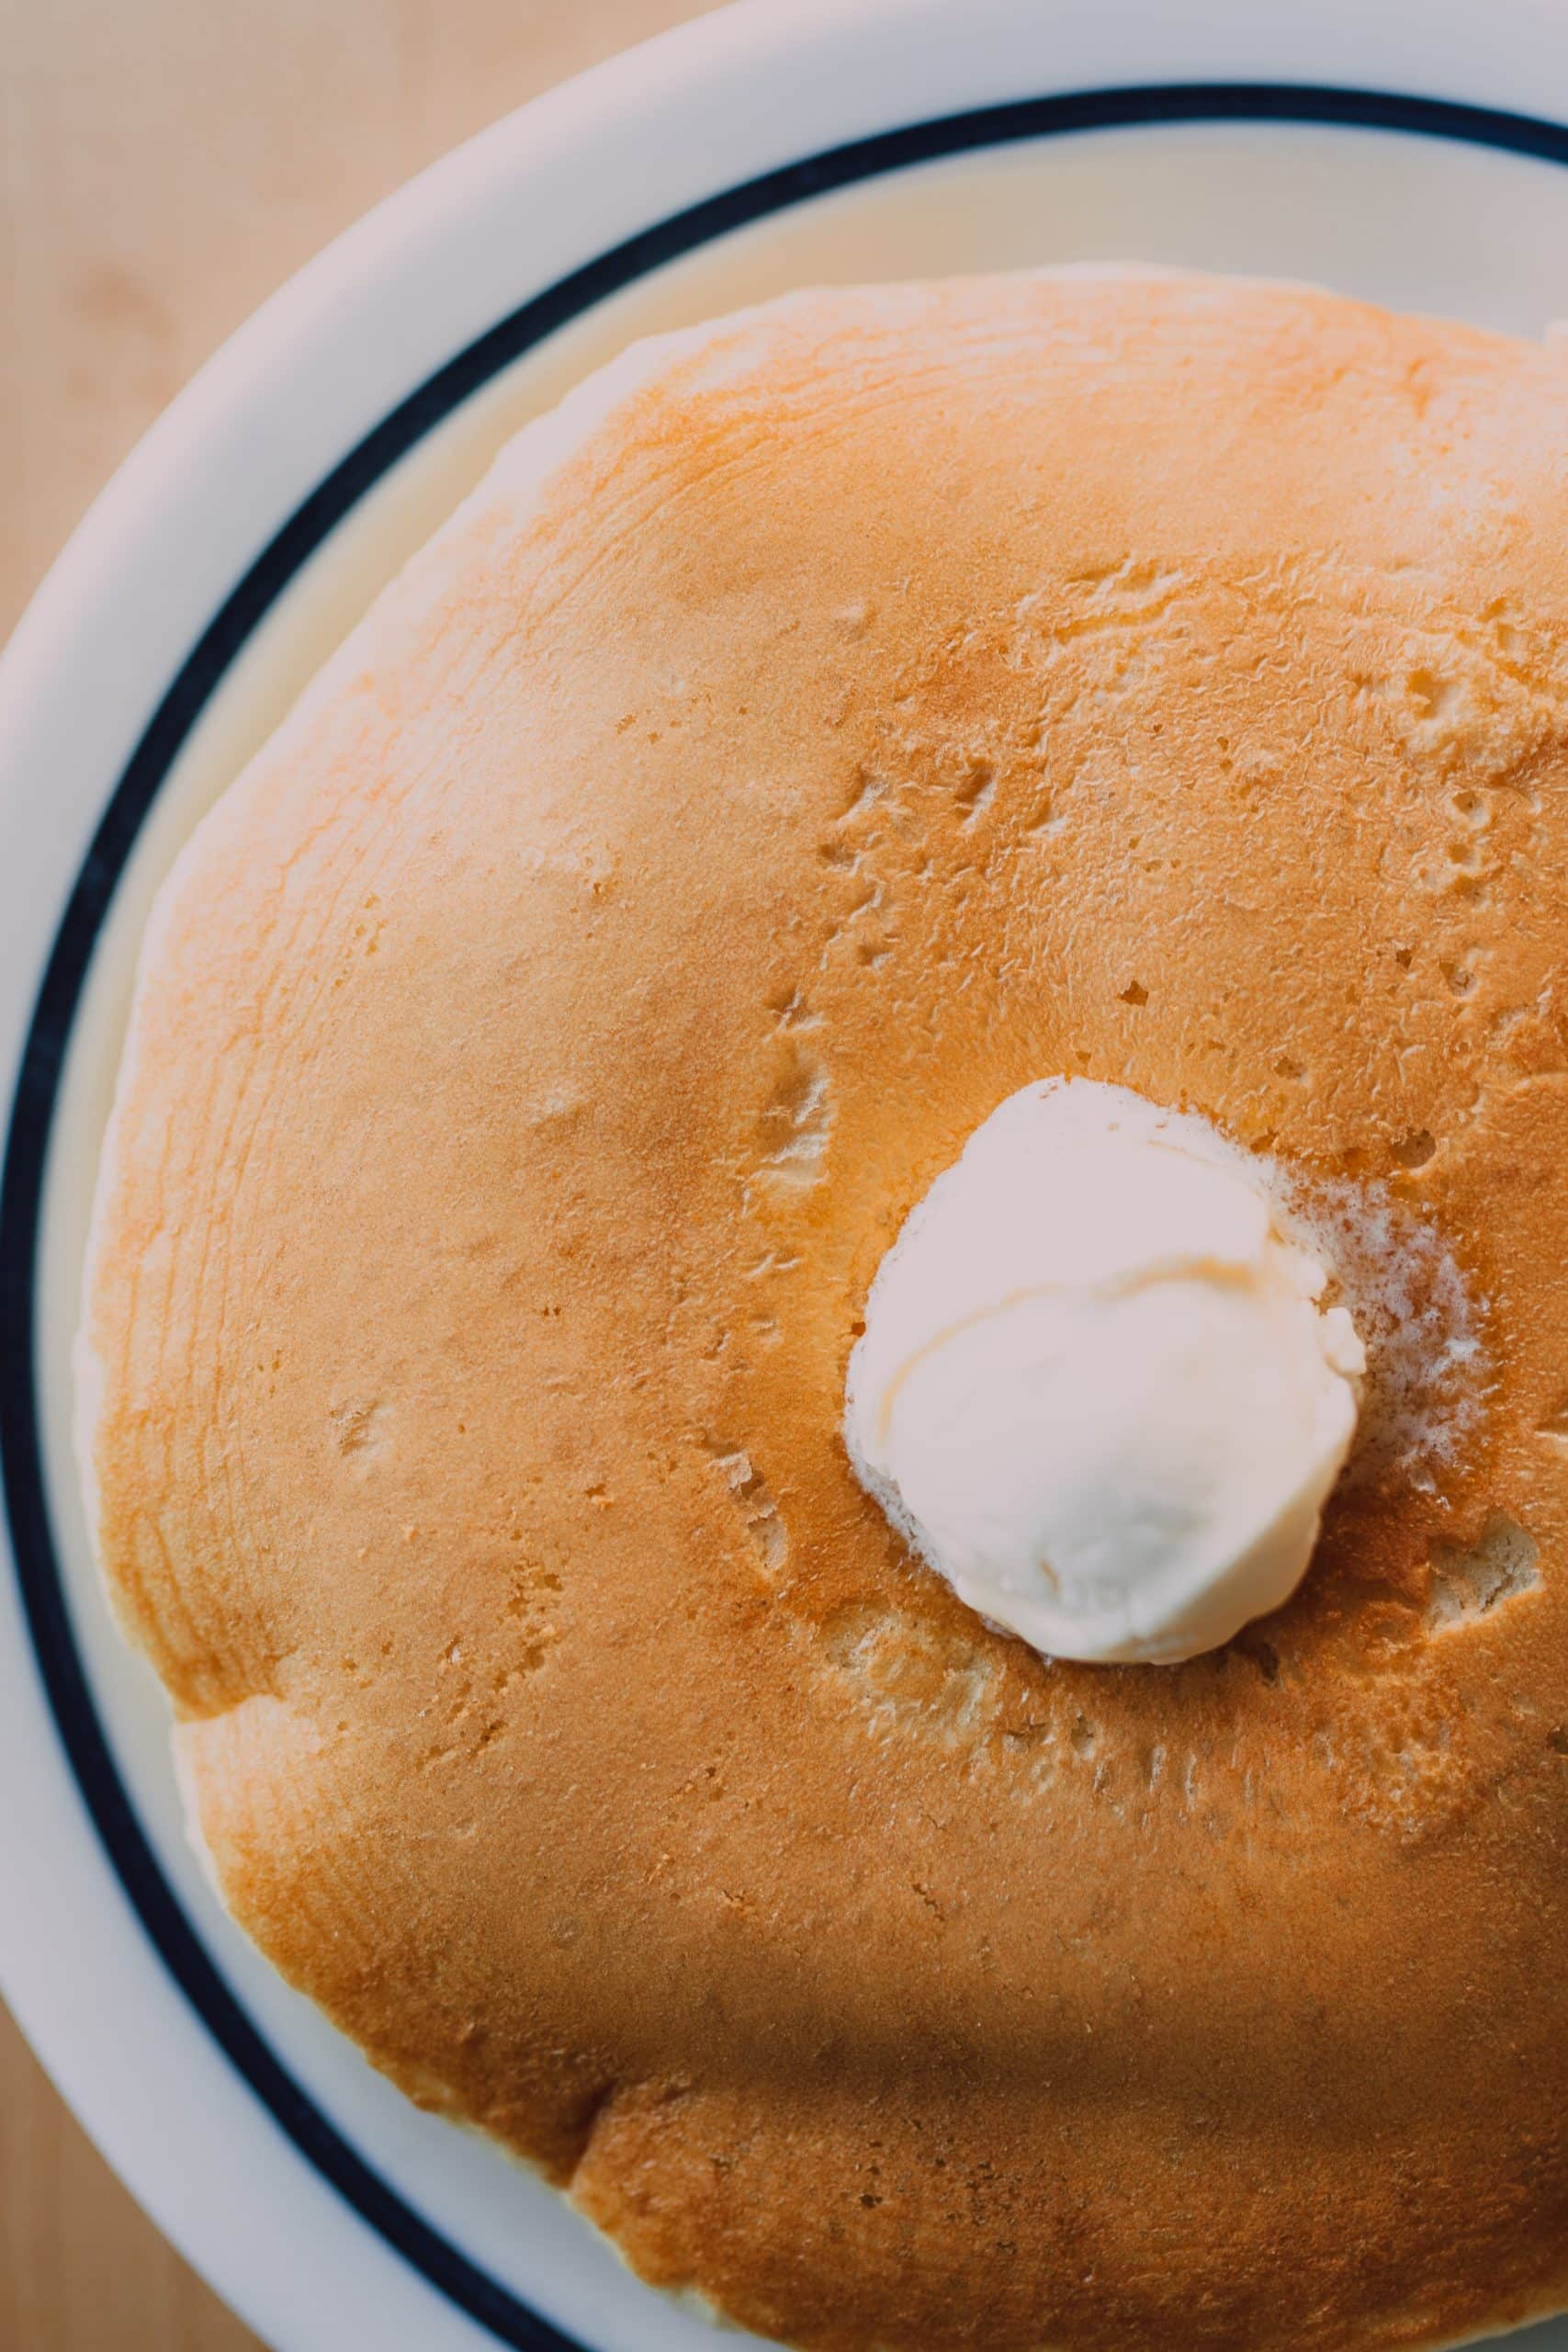 Hot and buttered pancakes are one menu item you will find at Cracker Barrel Kingsland.